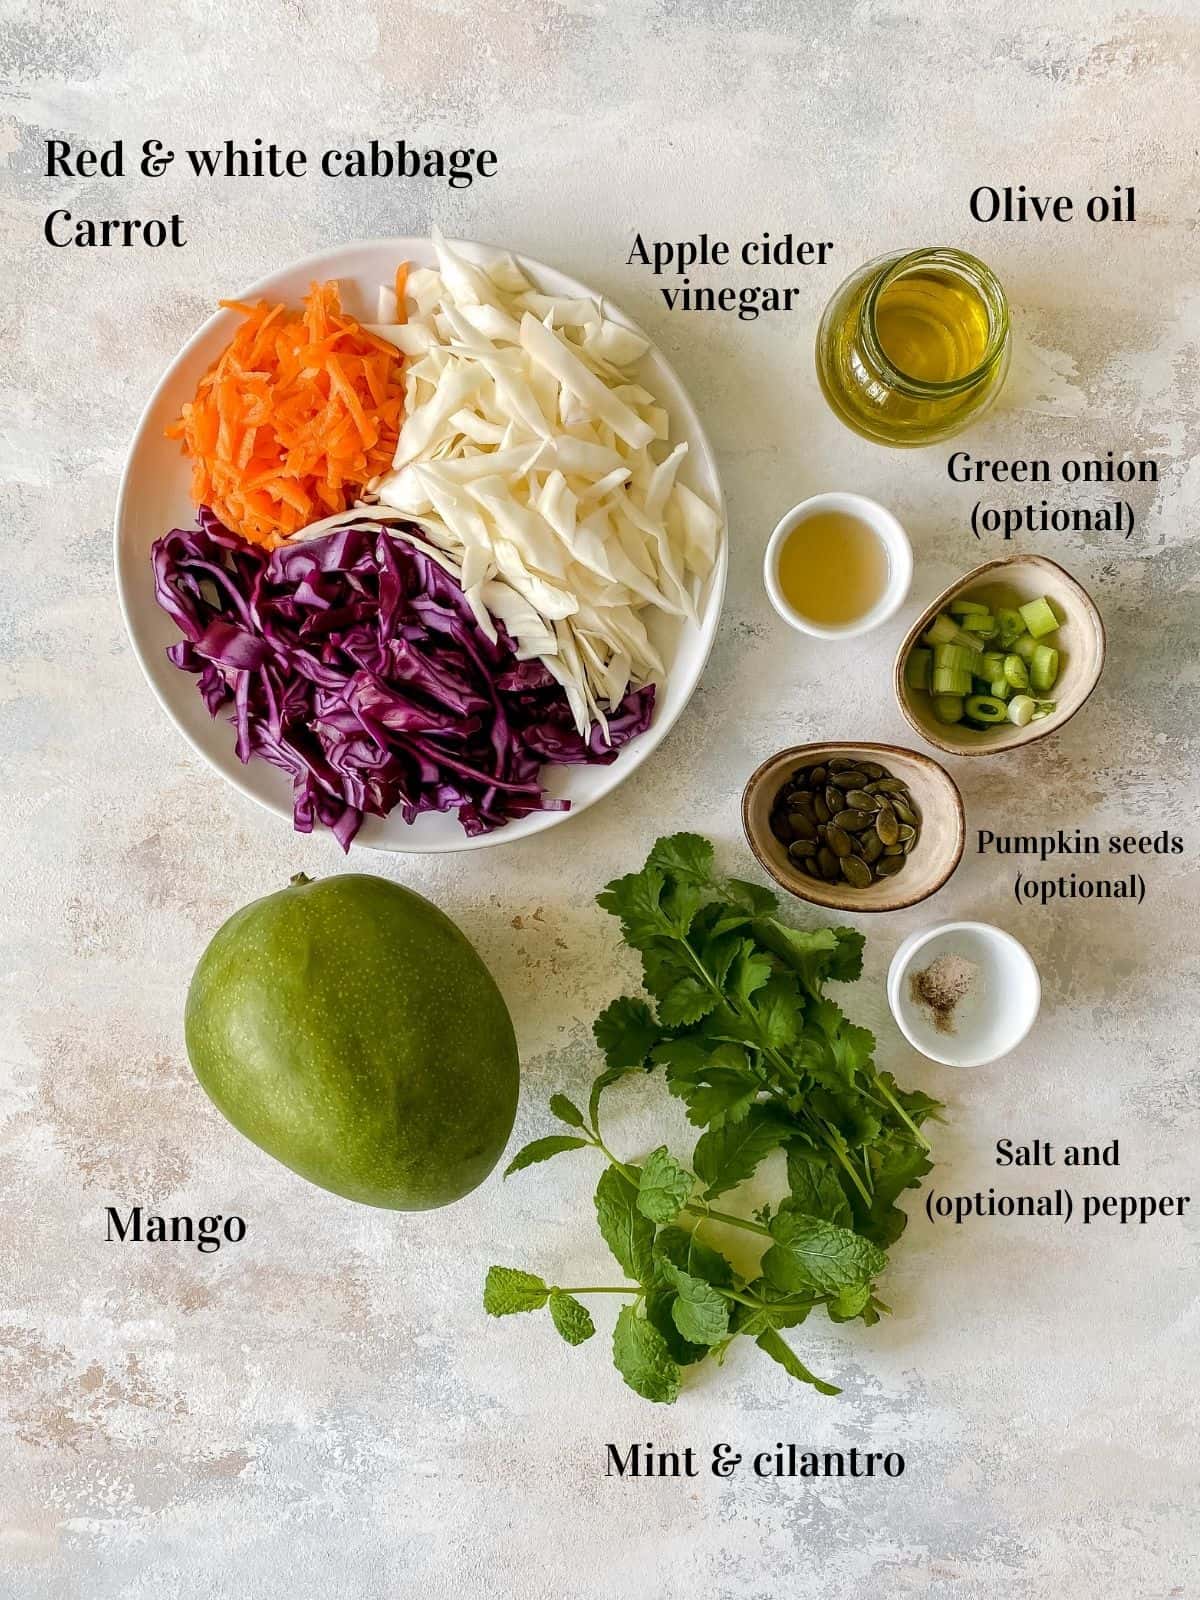 overhead view of a plate of red and white cabbage and carrot, bowls of green onion, pumpkin seeds, olive oil, apple cider vinegar, and a mango and herbs.